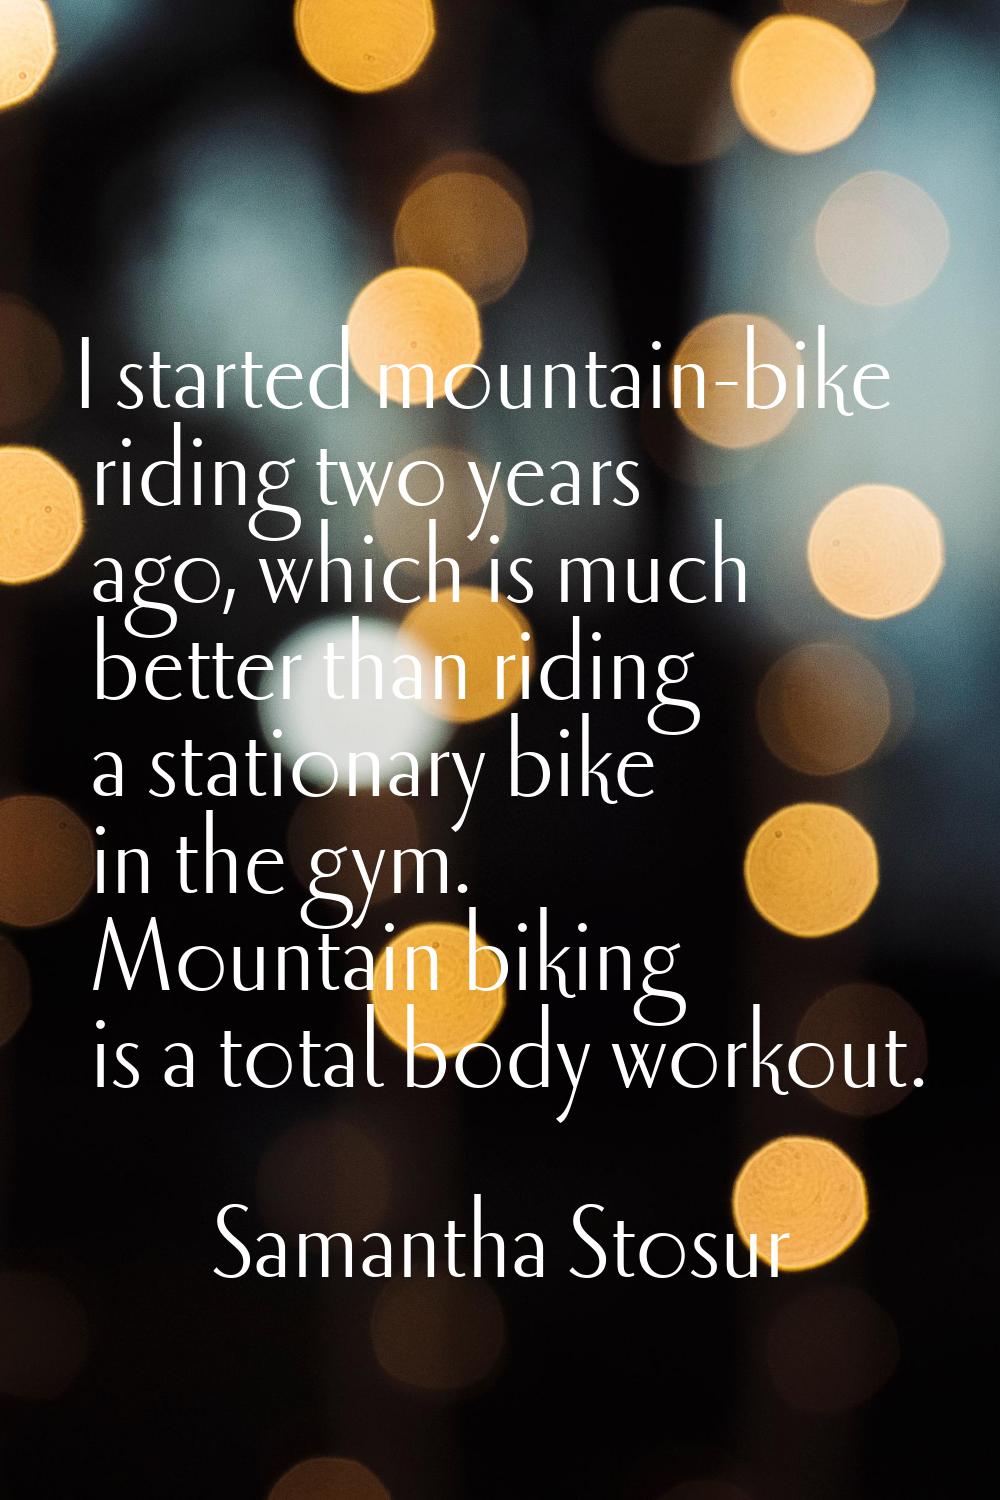 I started mountain-bike riding two years ago, which is much better than riding a stationary bike in